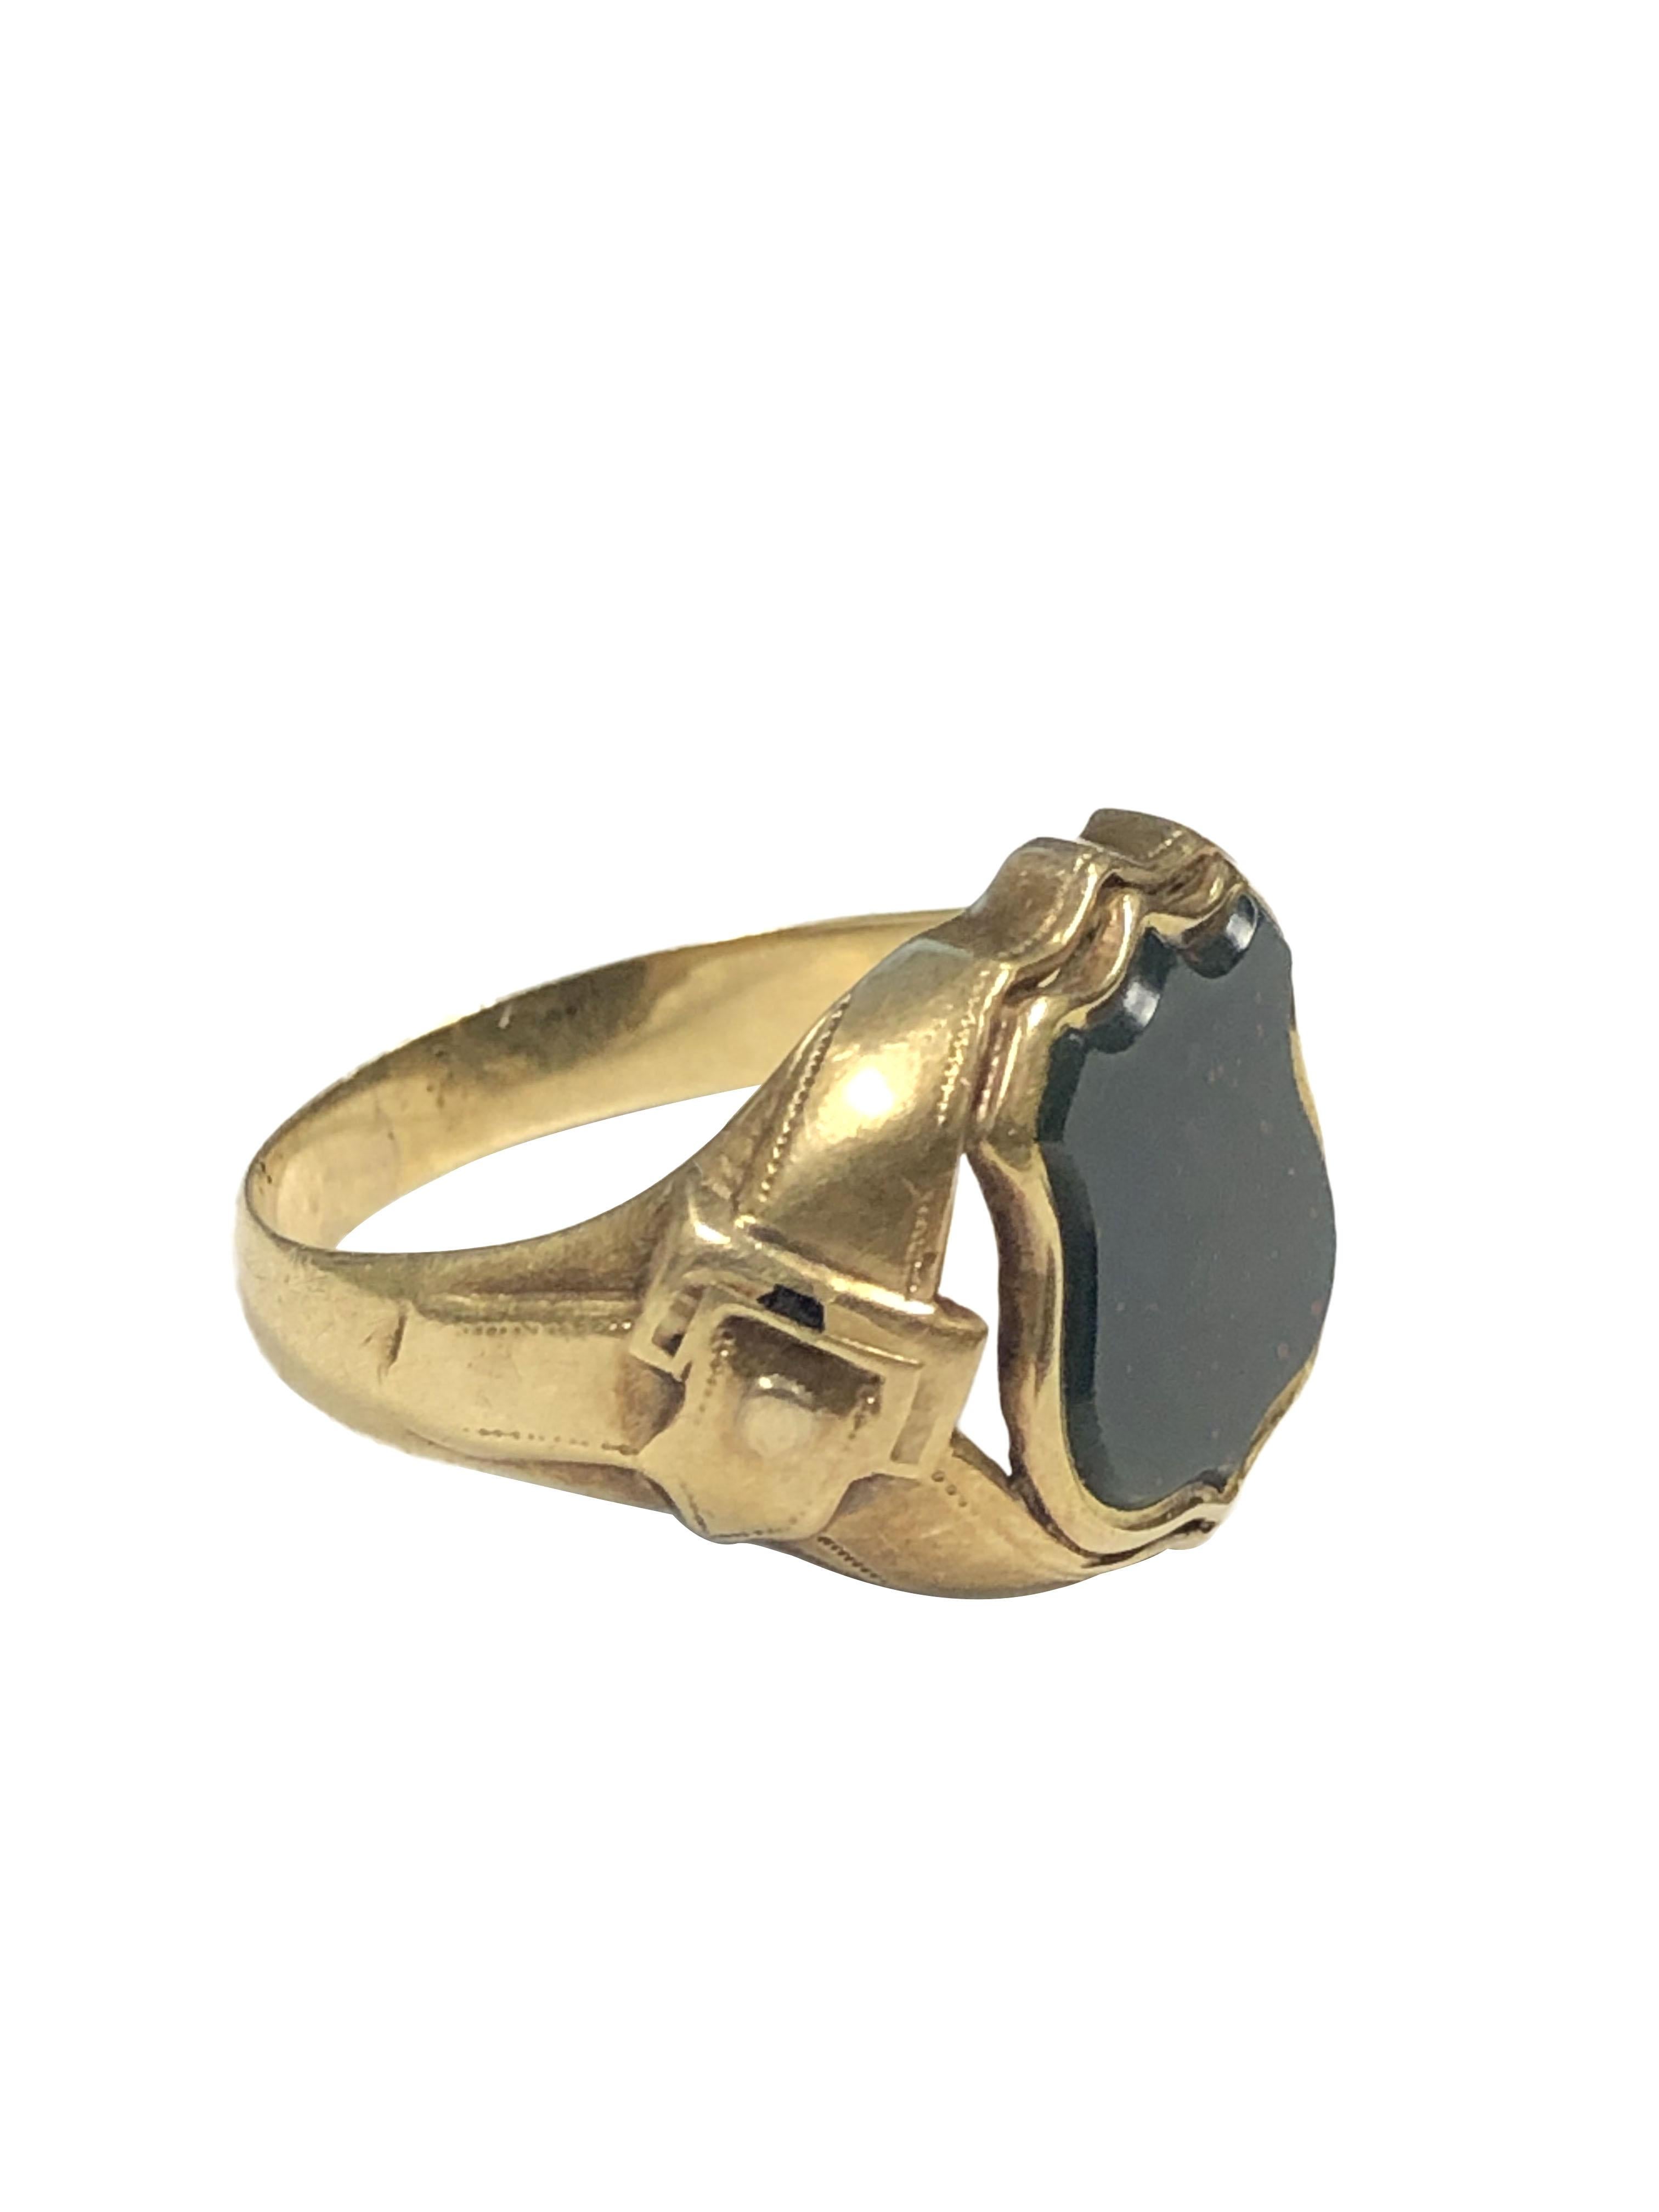 Edwardian Antique Gold and Blood Stone Signet Ring For Sale